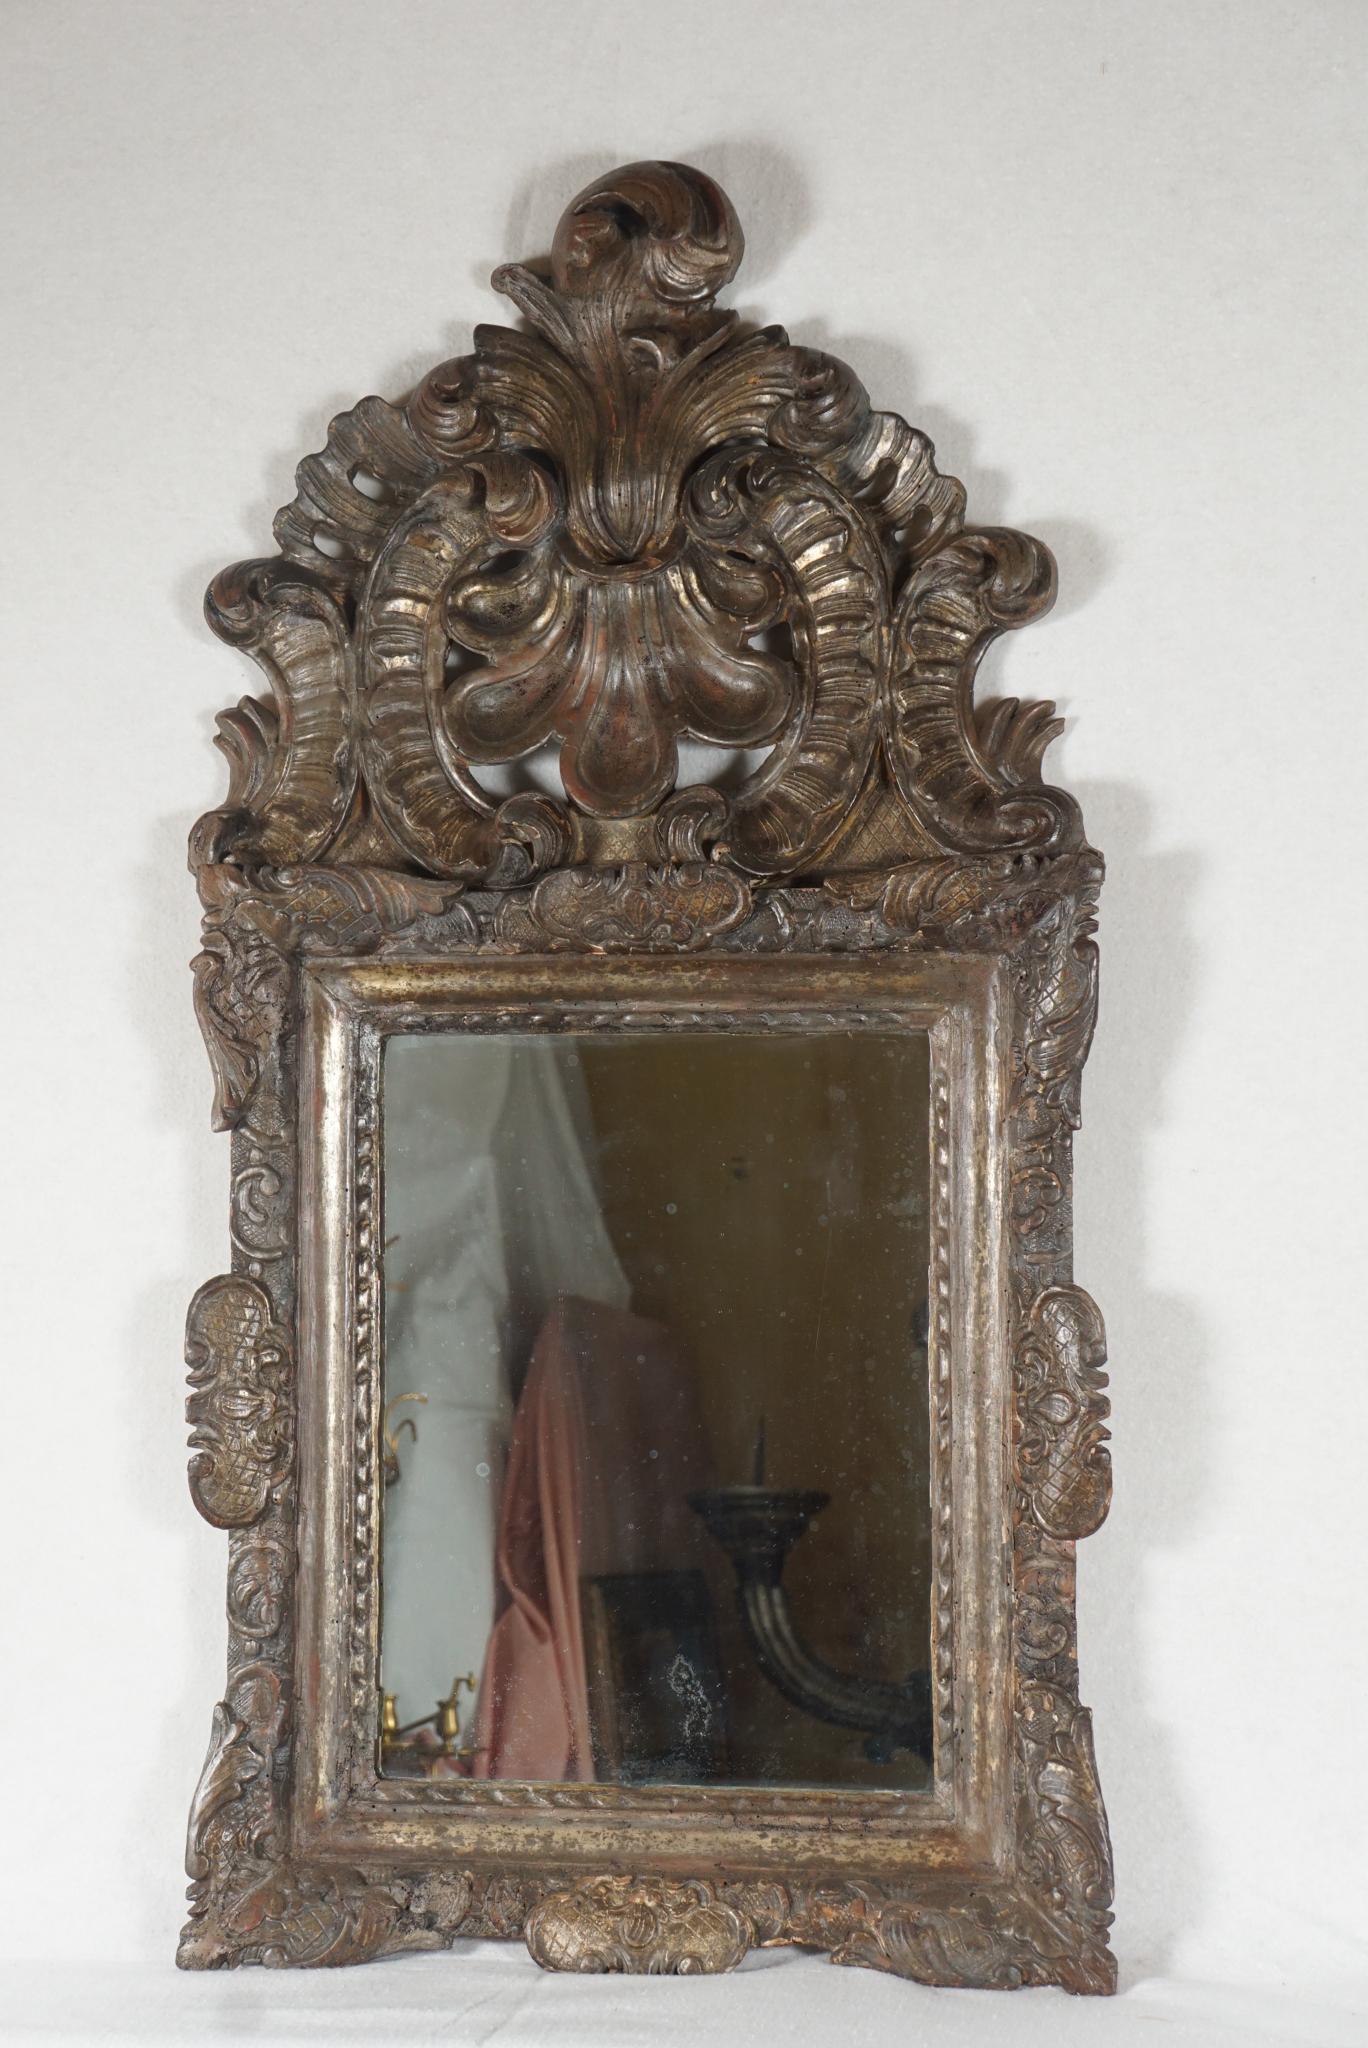 This fine old mirror from circa 1740 is created in carved wood, gessoed and silver gilded. Its bold and heavy frame is centered at the top by a dramatic openwork crest consisting of large carved s and c scroll elements with a dramatic stylized shell